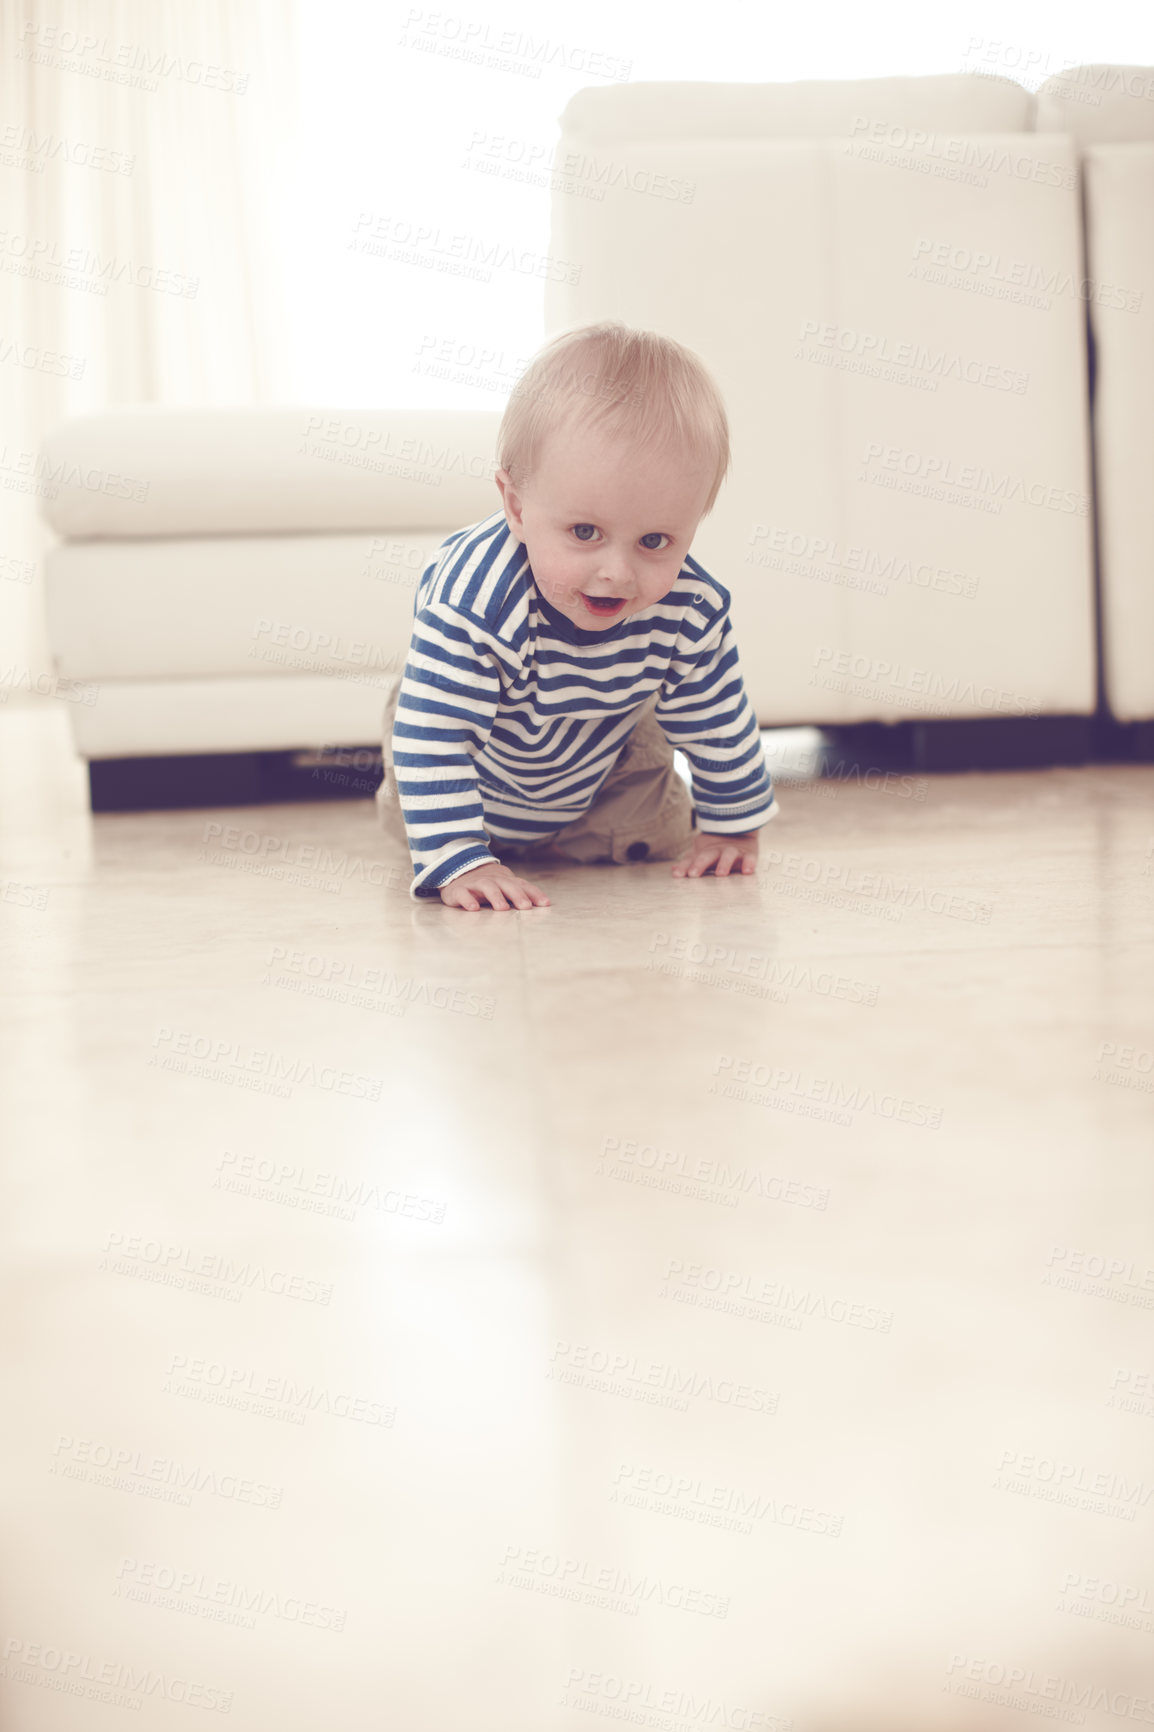 Buy stock photo A cute baby boy crawling on the floor at home